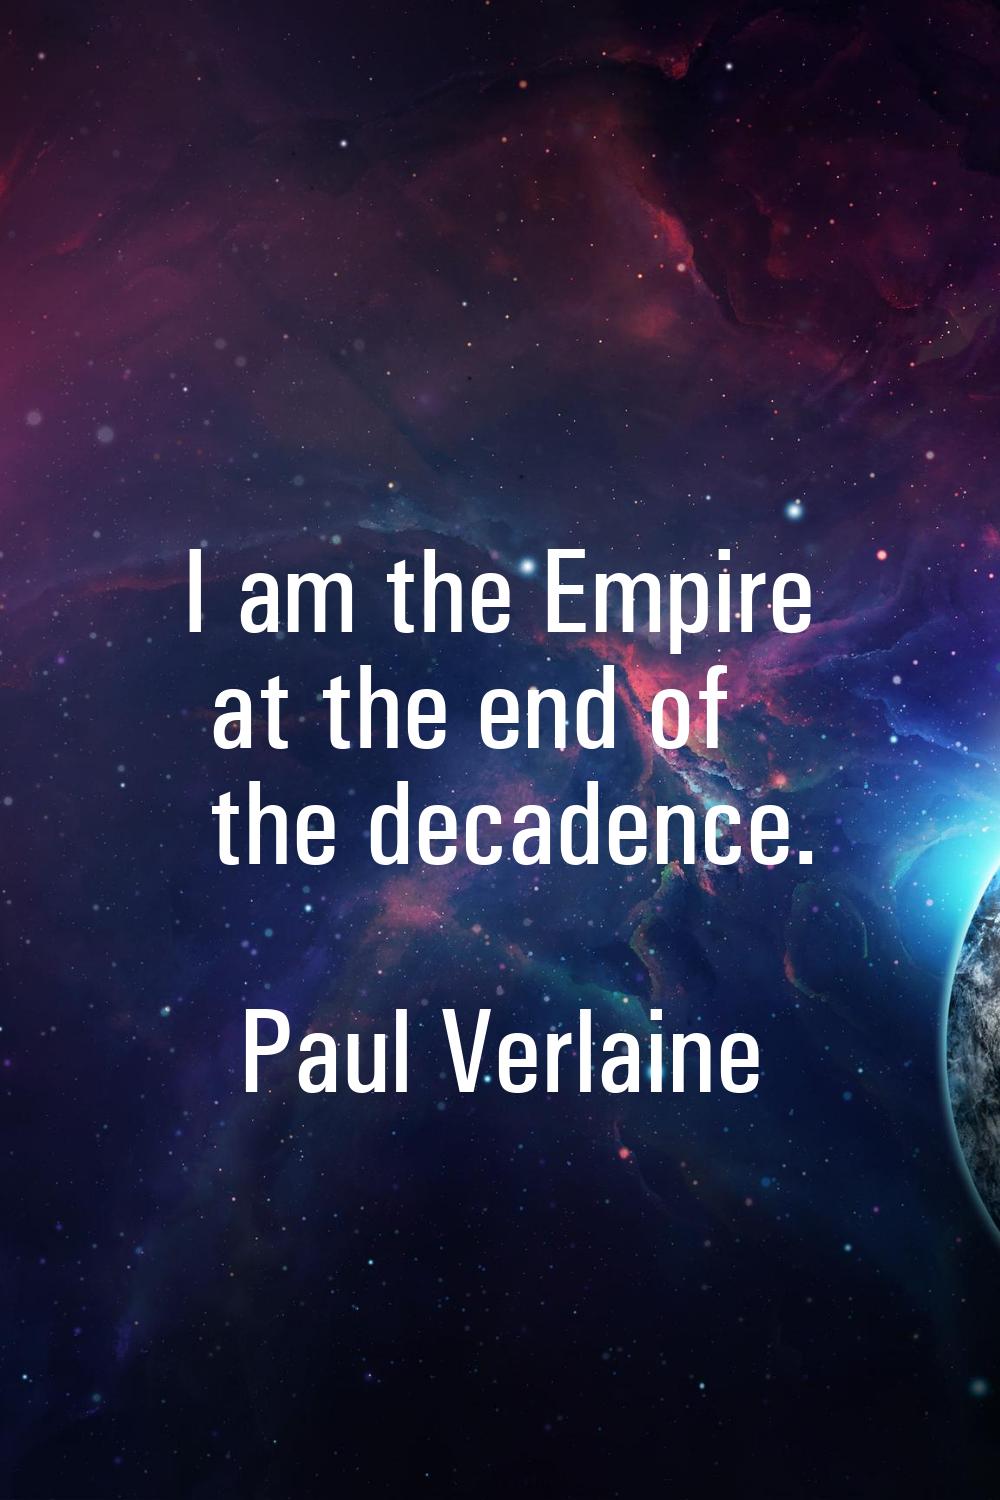 I am the Empire at the end of the decadence.